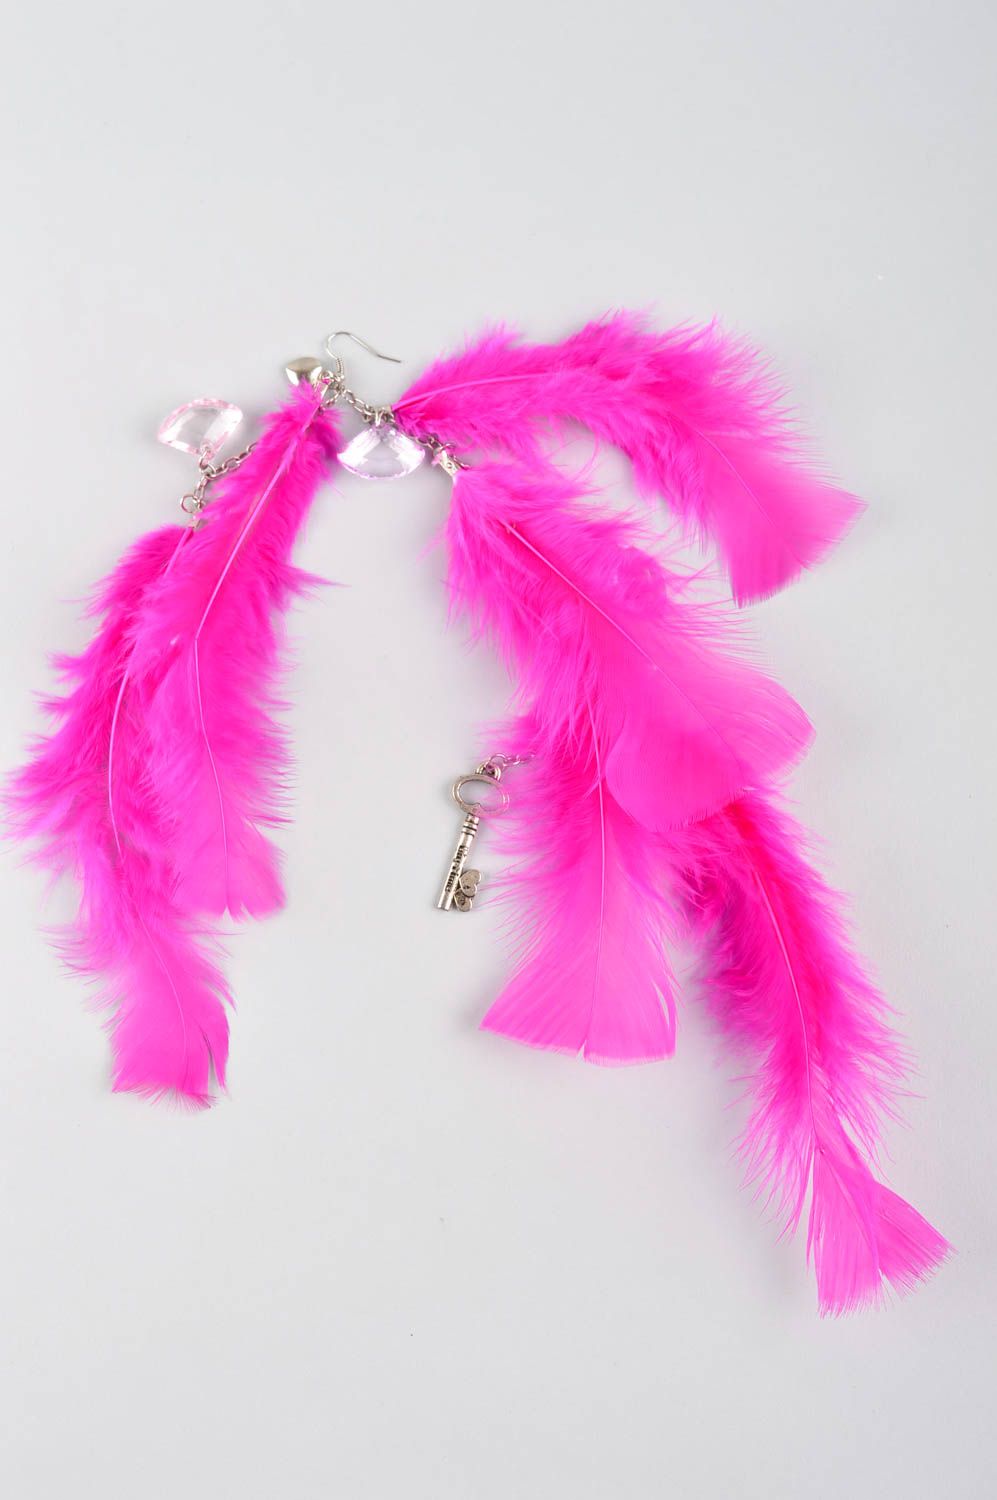 Handmade earring feather earrings designer earring fashion jewelry gifts for her photo 3